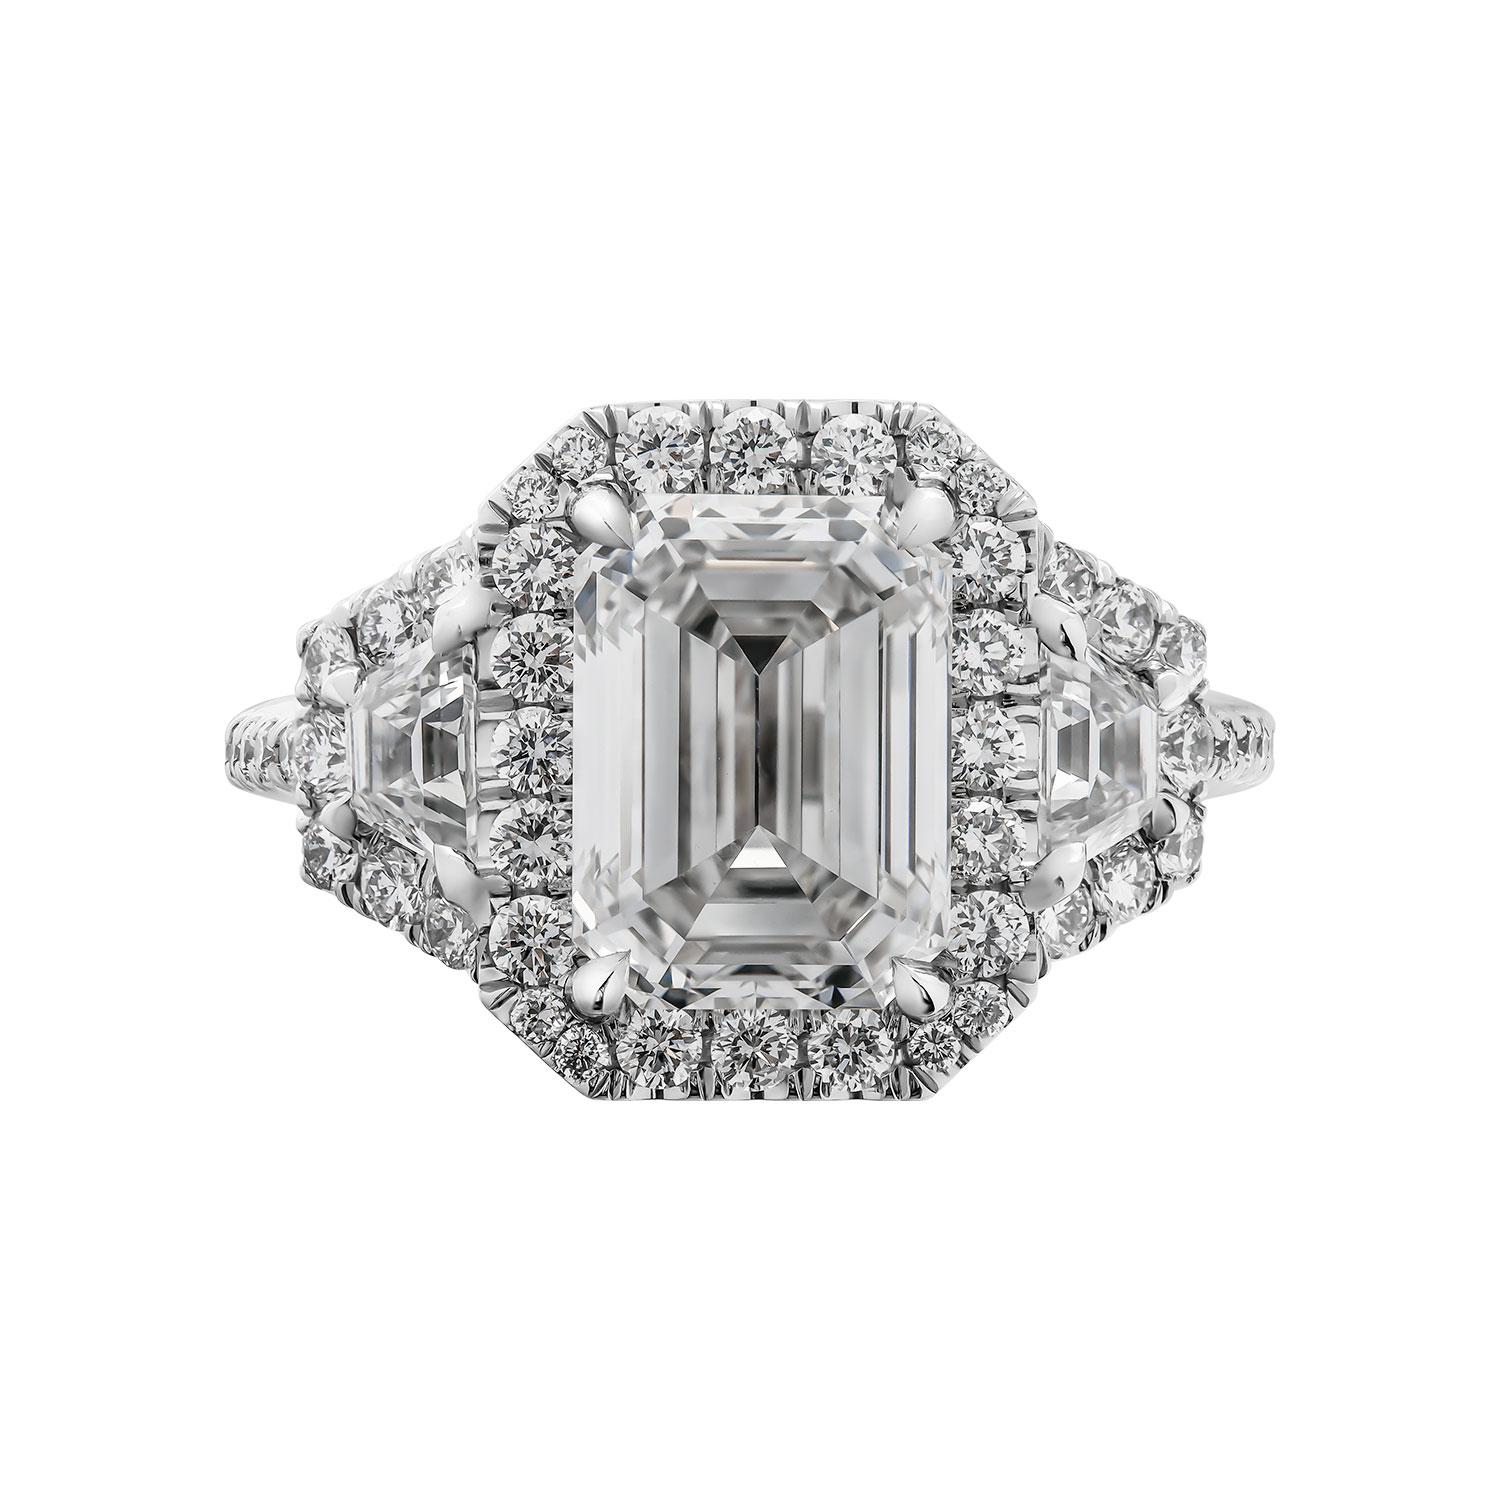 Mounted in handmade custom design setting featuring Platinum 950 , diamonds on the shank and around each stone, a true piece of art

Setting features exceptional pave work, delicate yet sturdy, includes approximately 1.08ct of small full brilliant